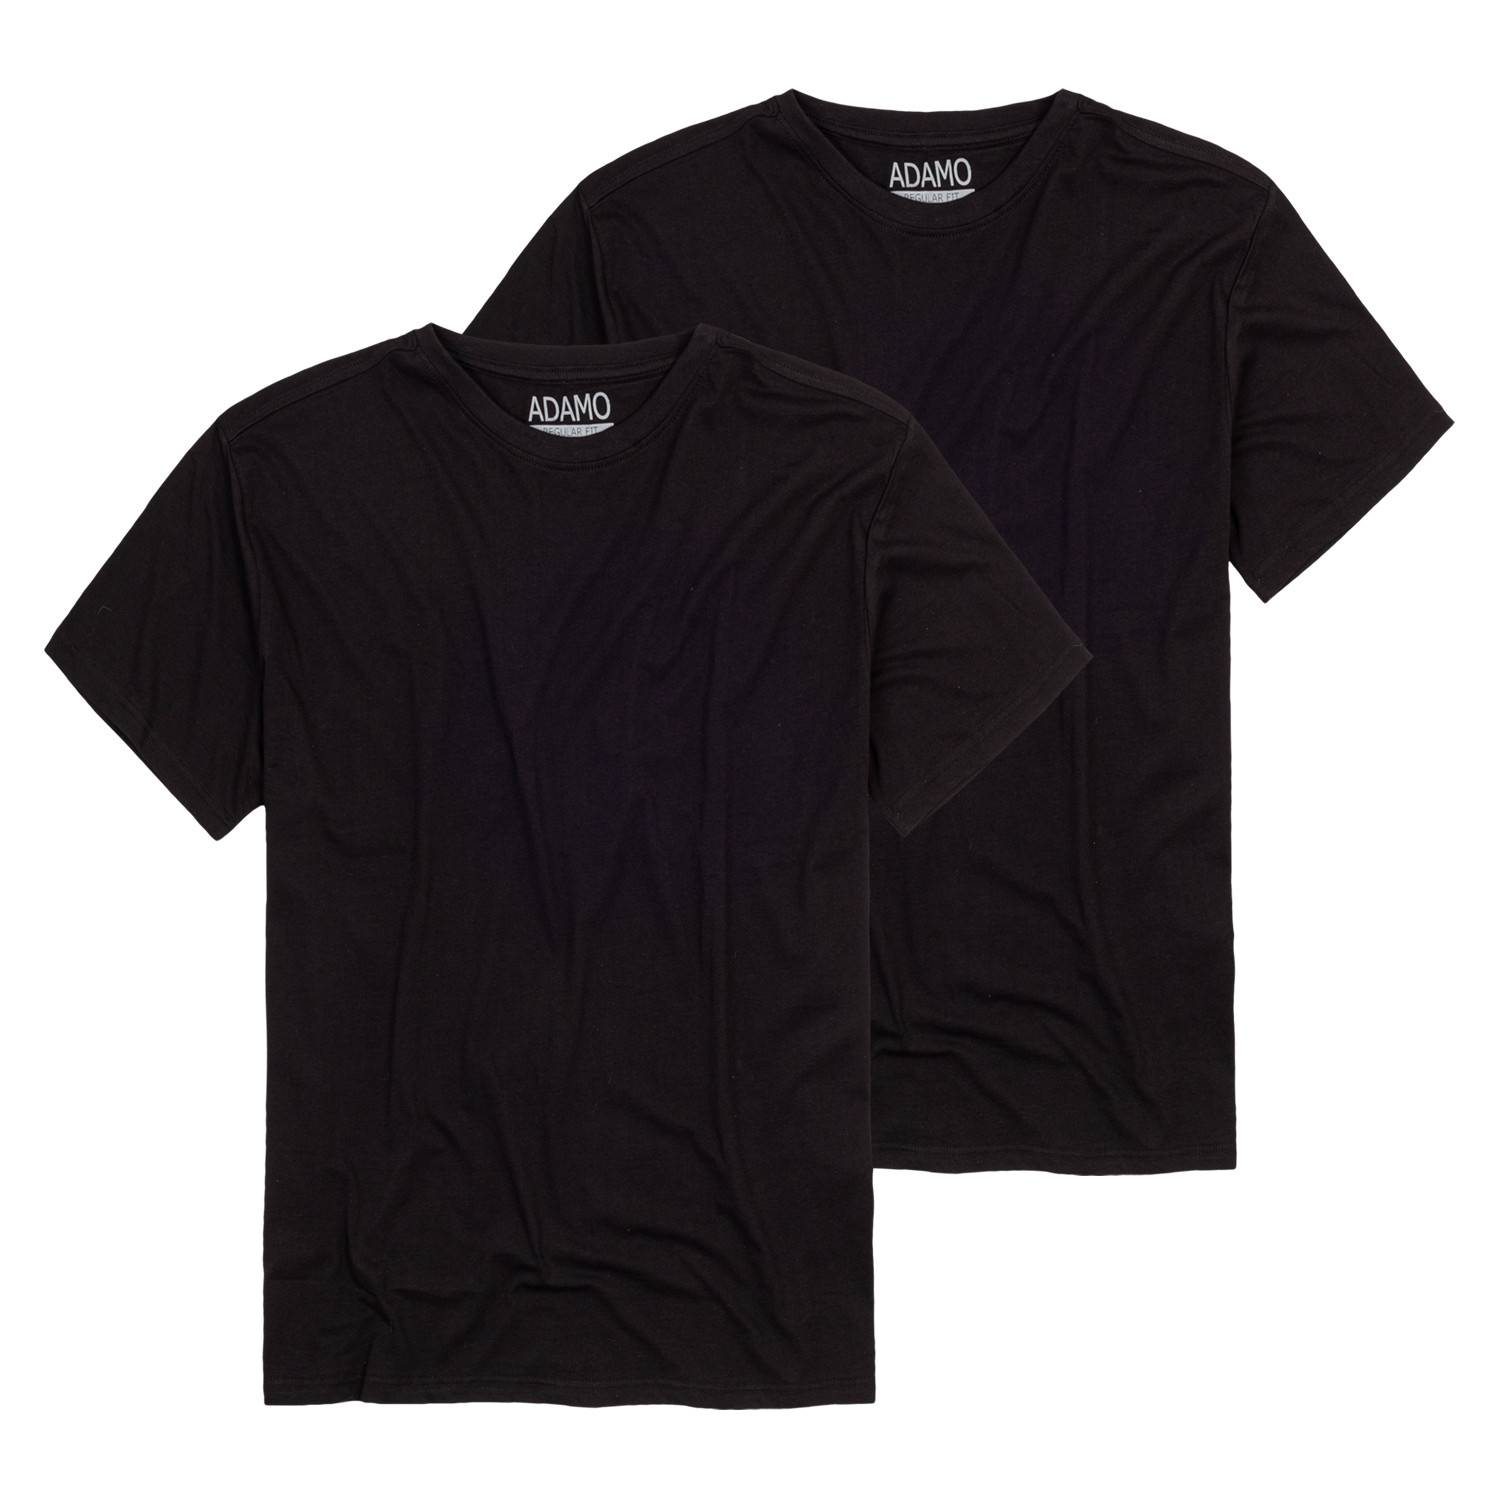 T-shirts in black series Kilian regular fit by Adamo for men up to oversize 10XL - double pack